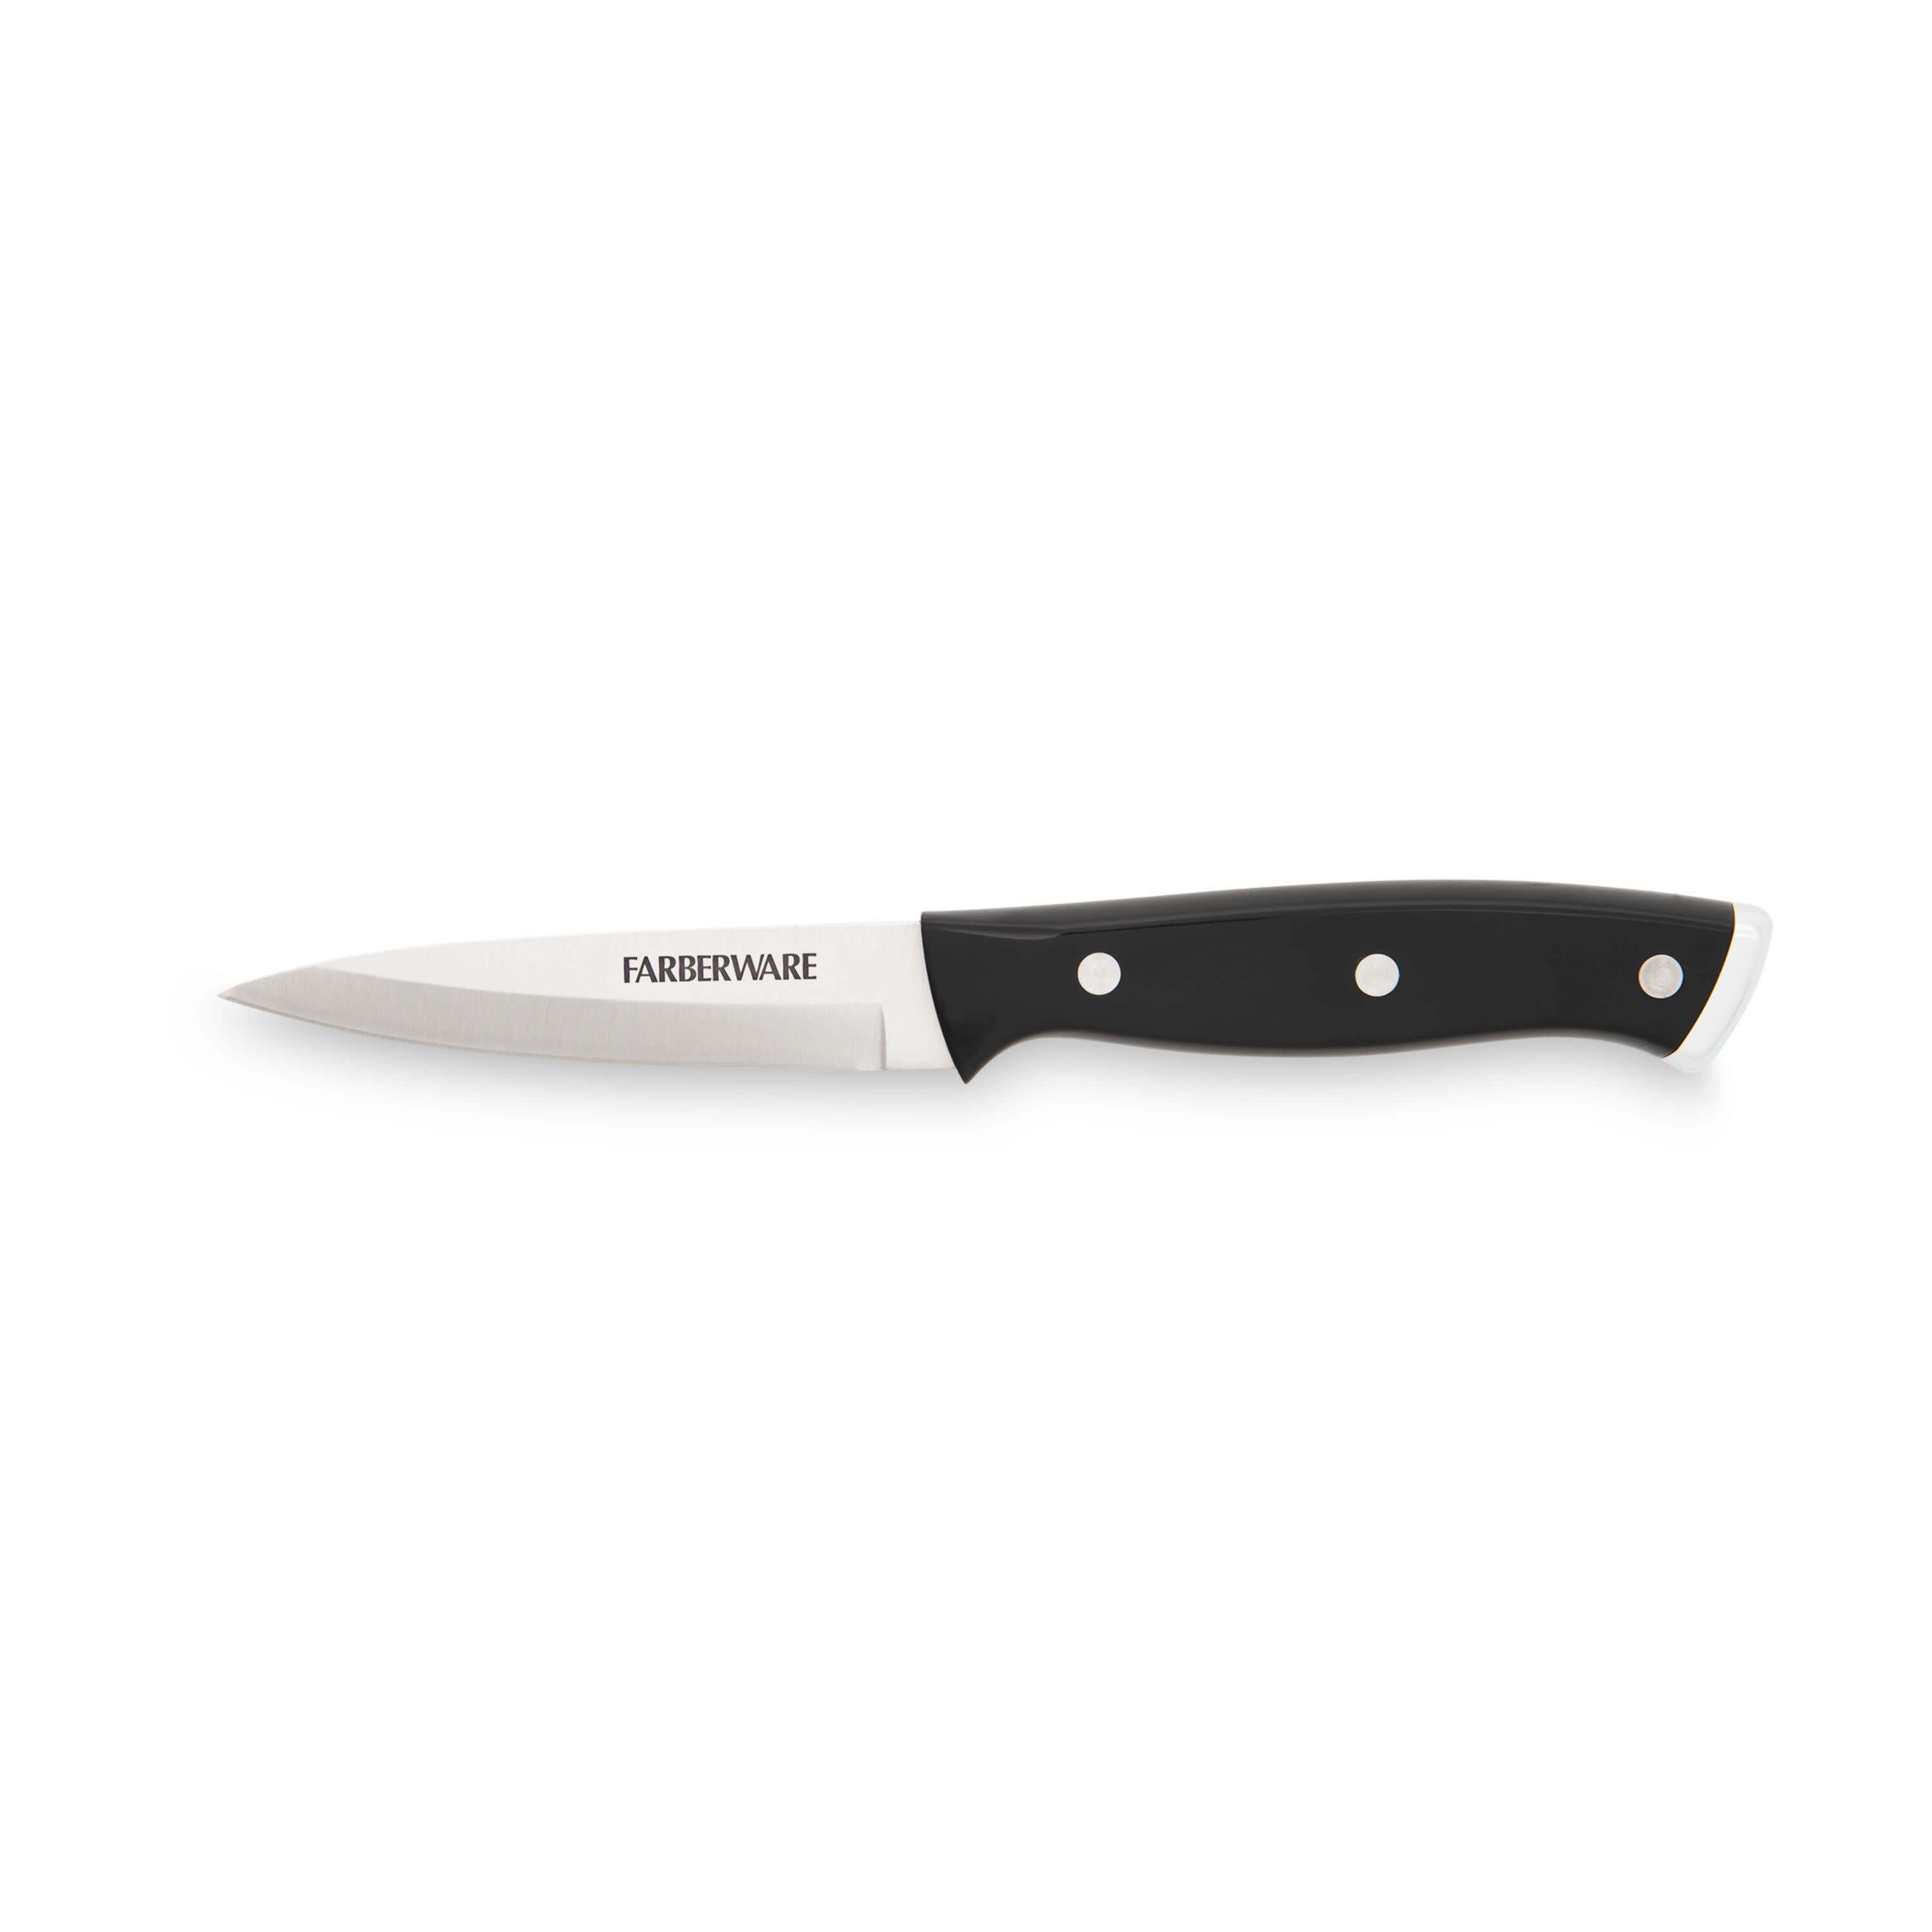 Farberware Classic 3.5-inch Triple Riveted Paring Knife with Endcap and Black Handle